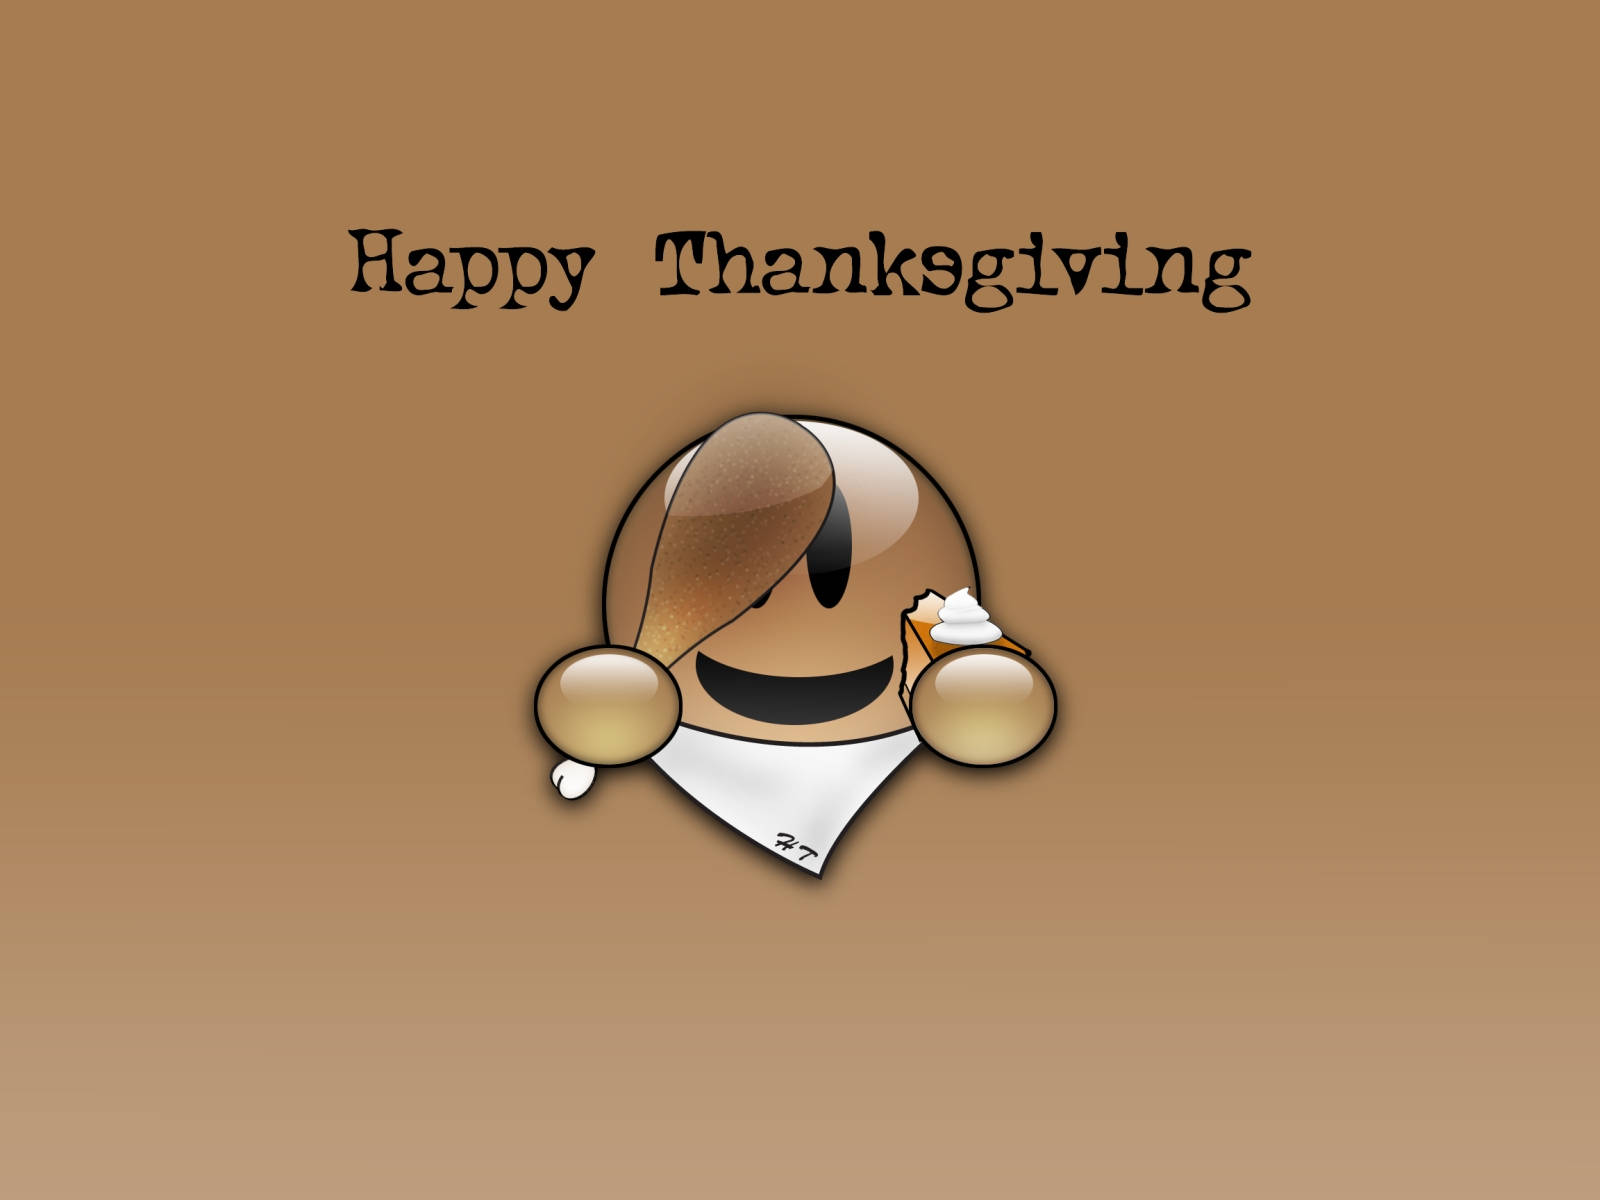 Top 999+ Cute Thanksgiving Wallpapers Full HD, 4K✅Free to Use